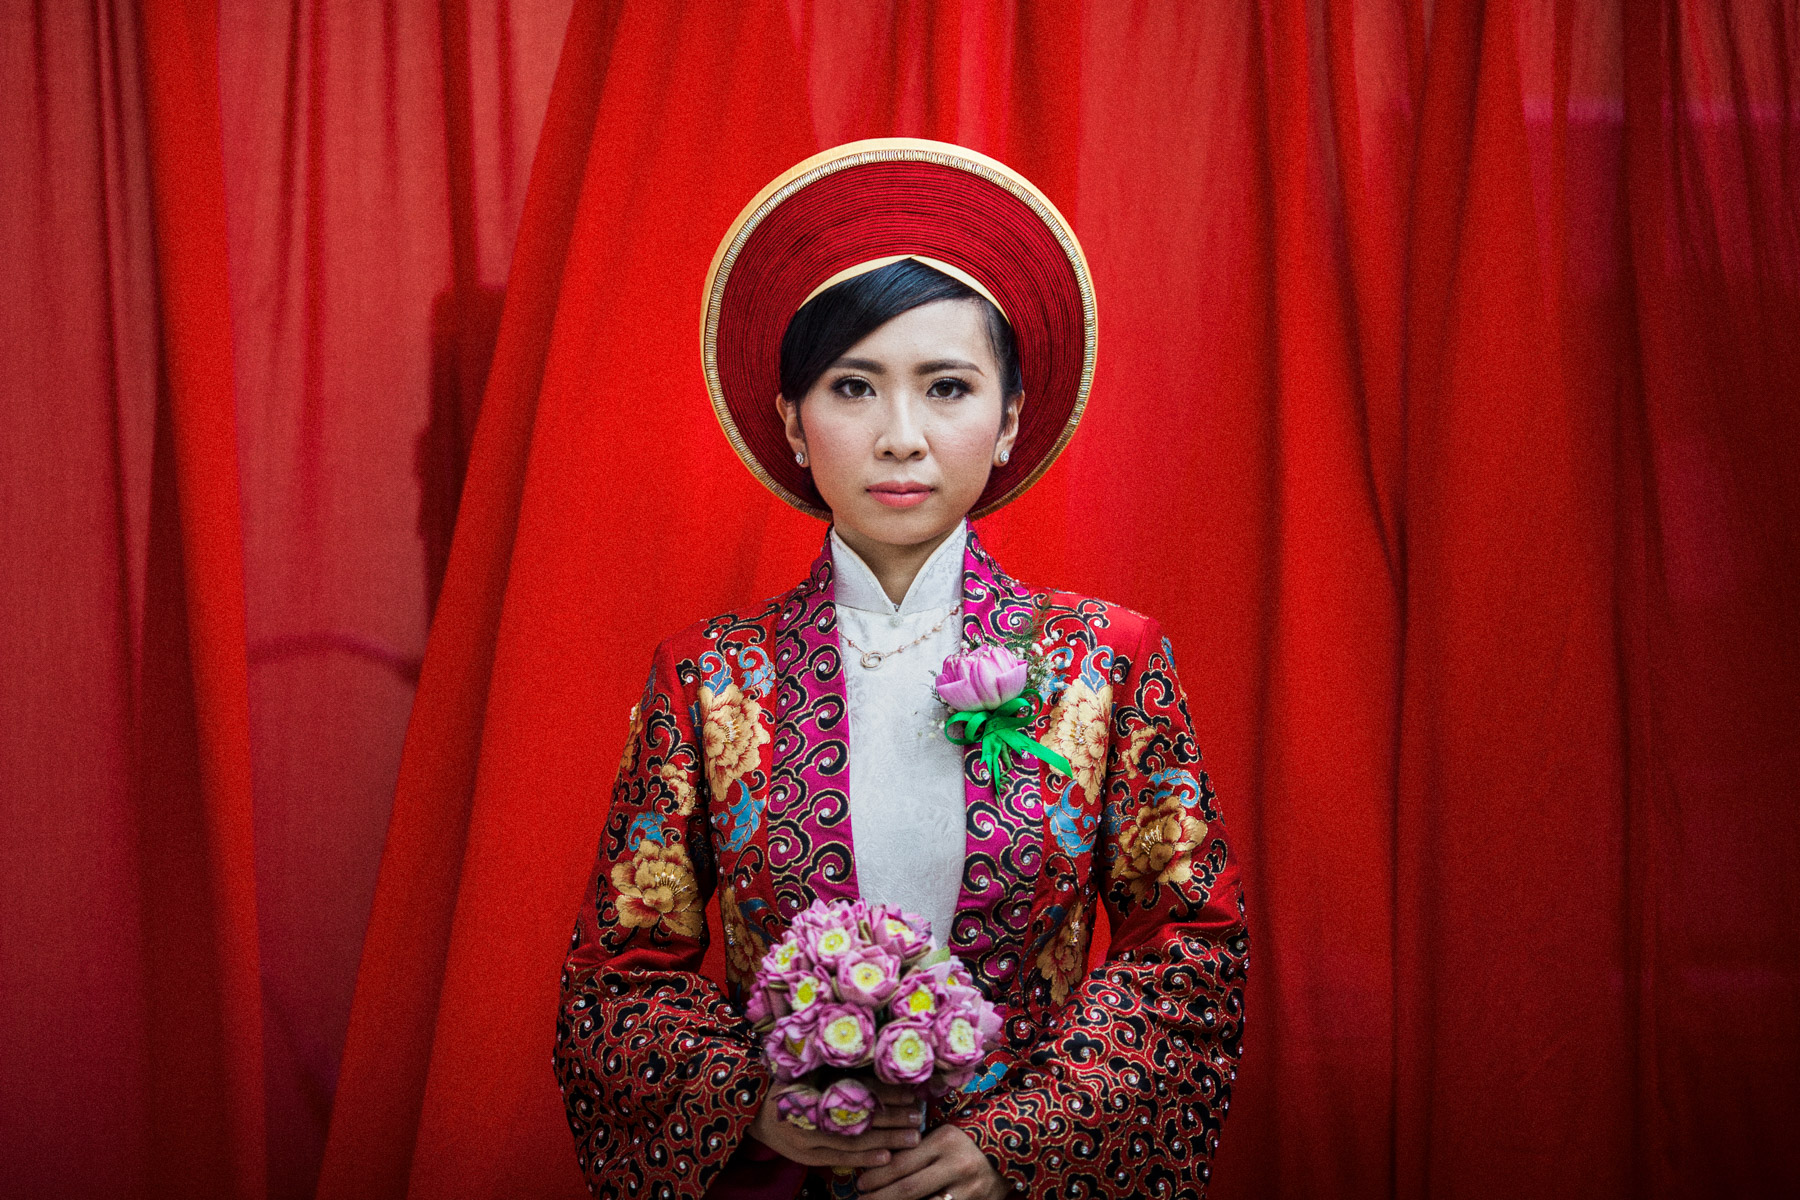 A portrait of a young Vietnamese bride in Ho Chi Minh City, Vietnam.